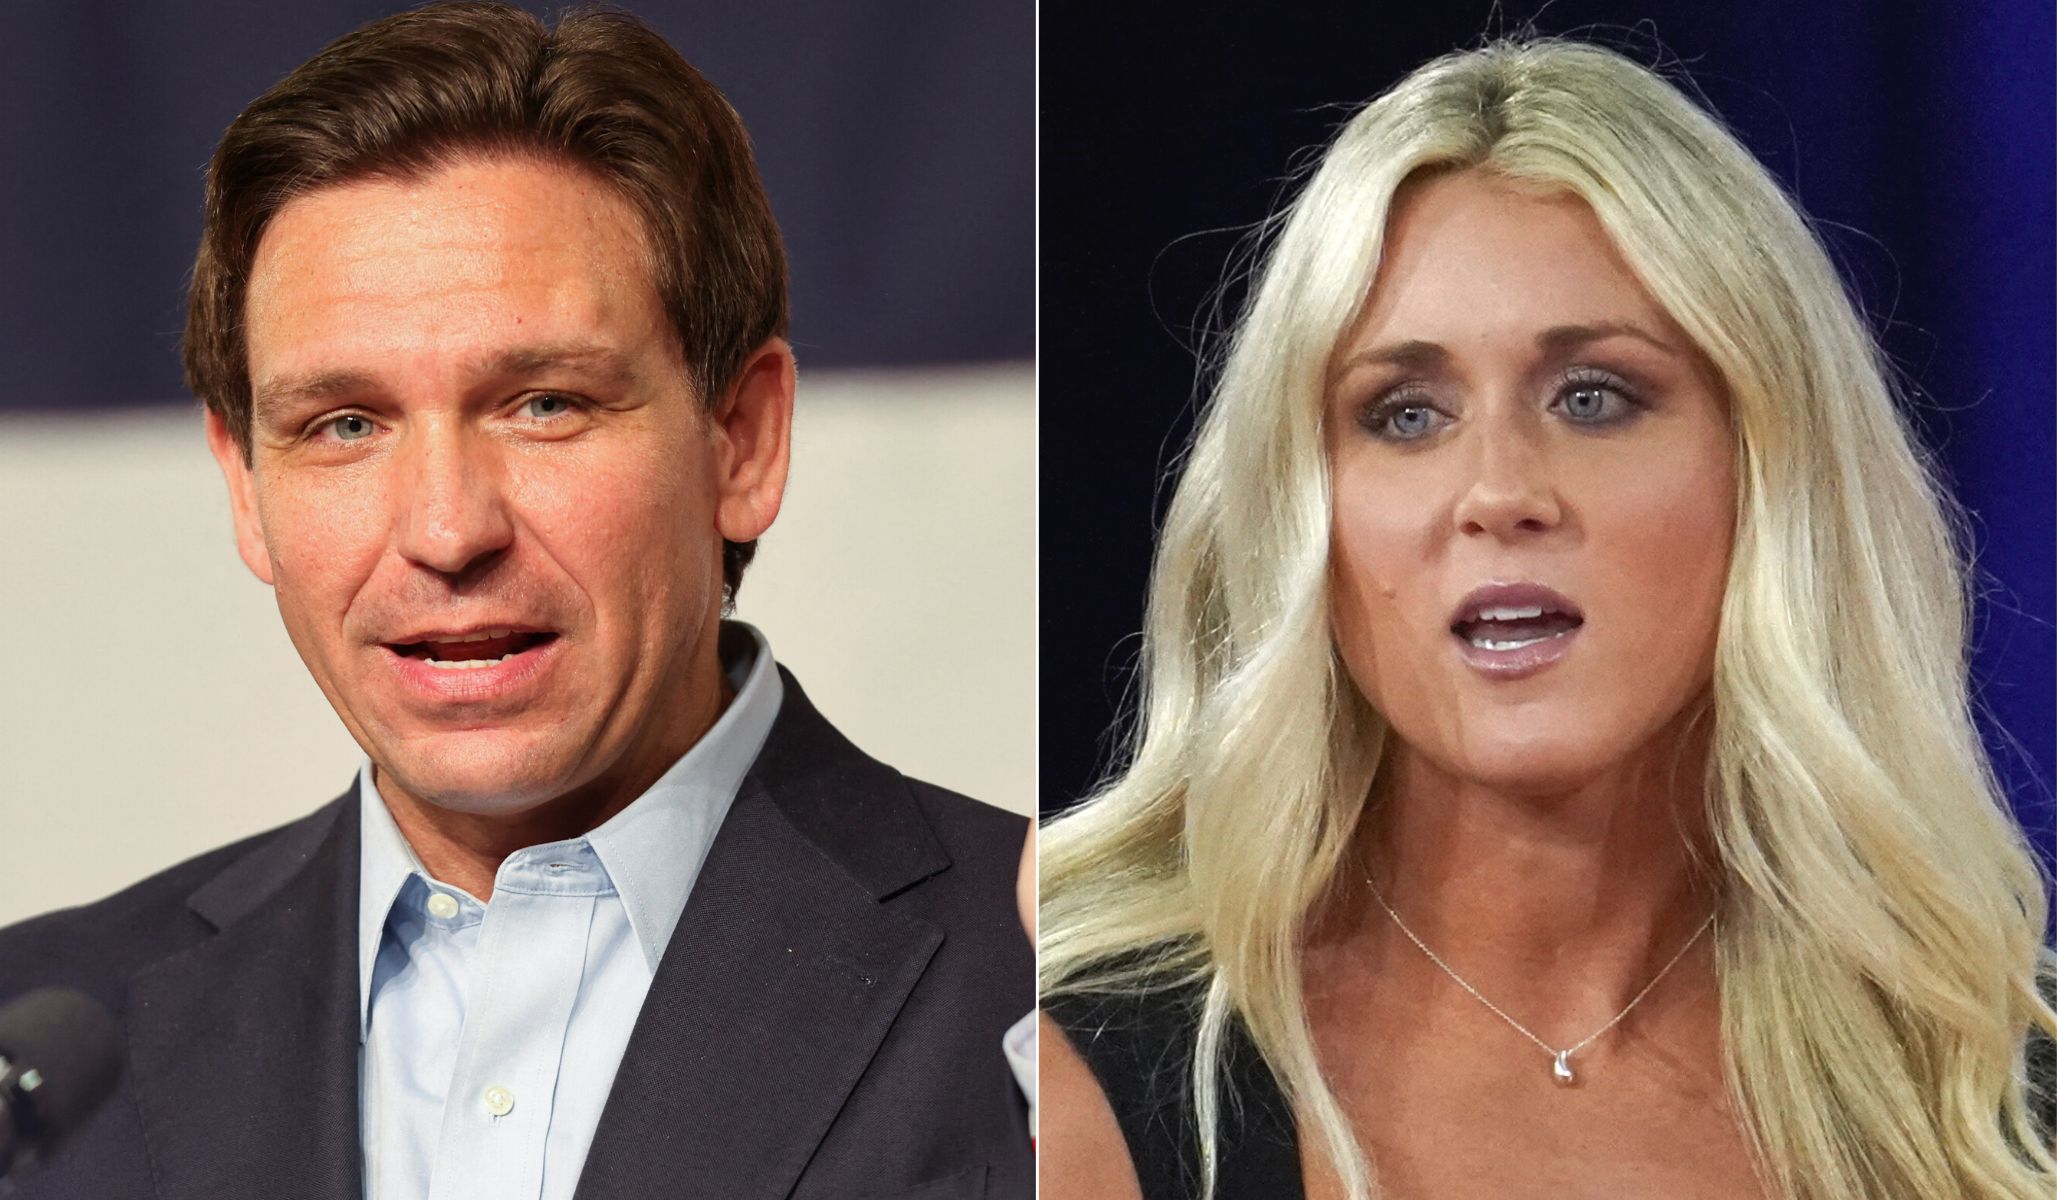 Riley Gaines Praises Ron DeSantis as a Leader Who Has ‘Drawn the Line,’ Protected Women’s Sports